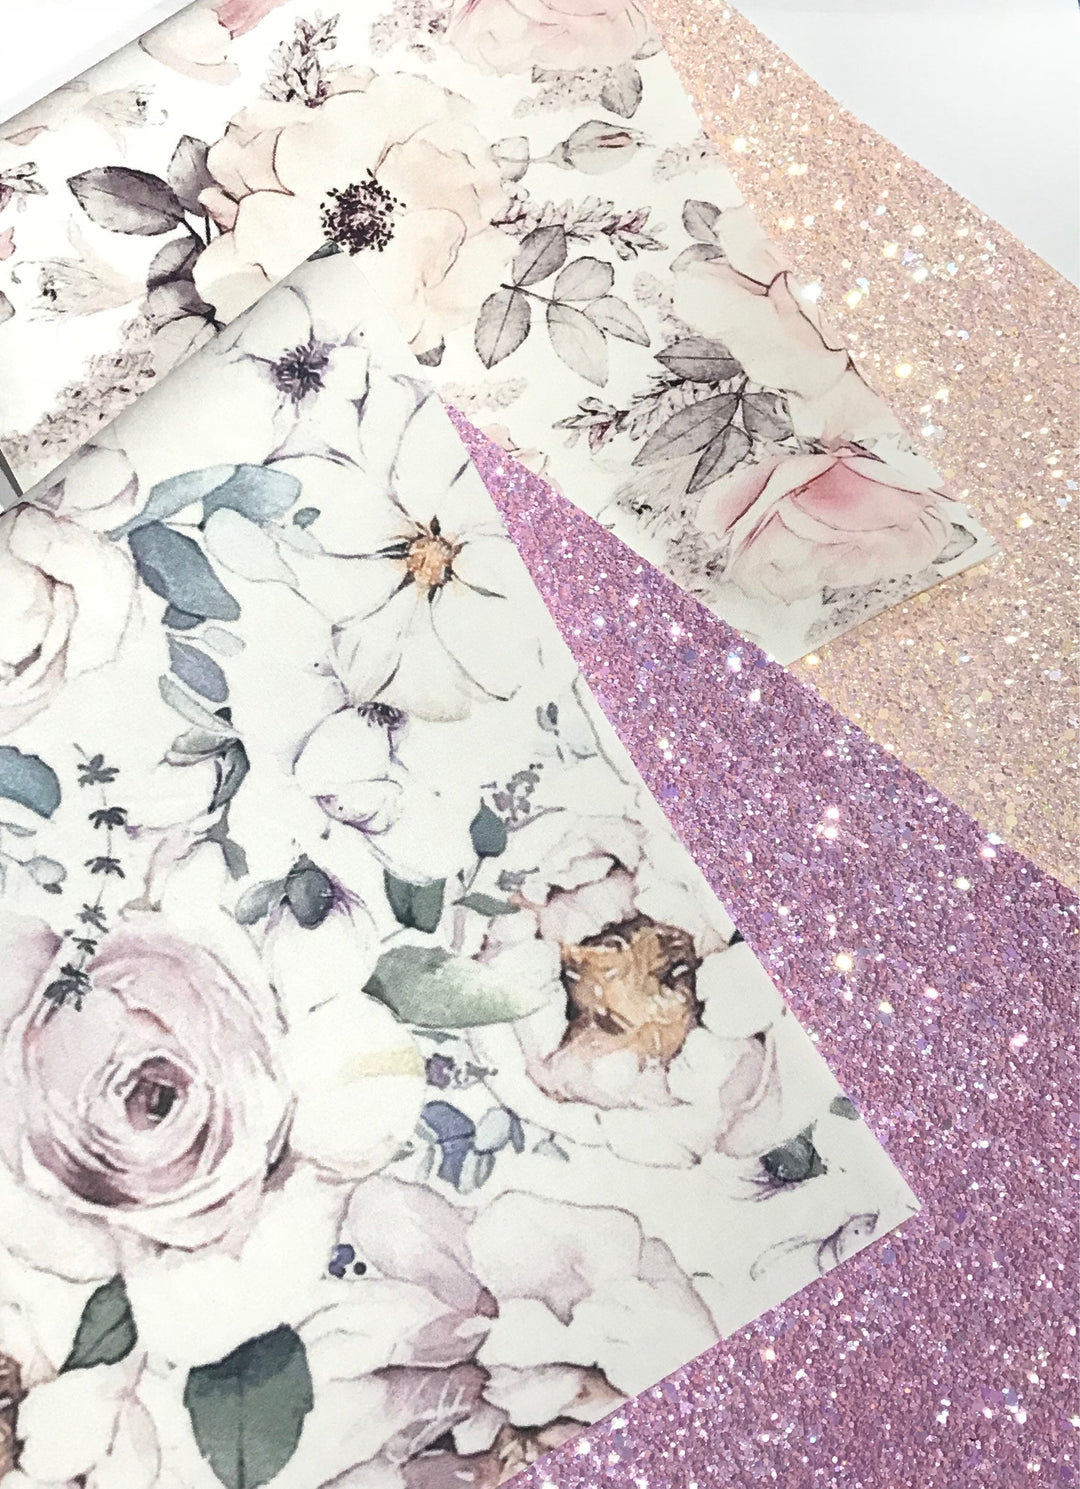 Isadora Floral Felt or Glitter Backed Fabric Sheets